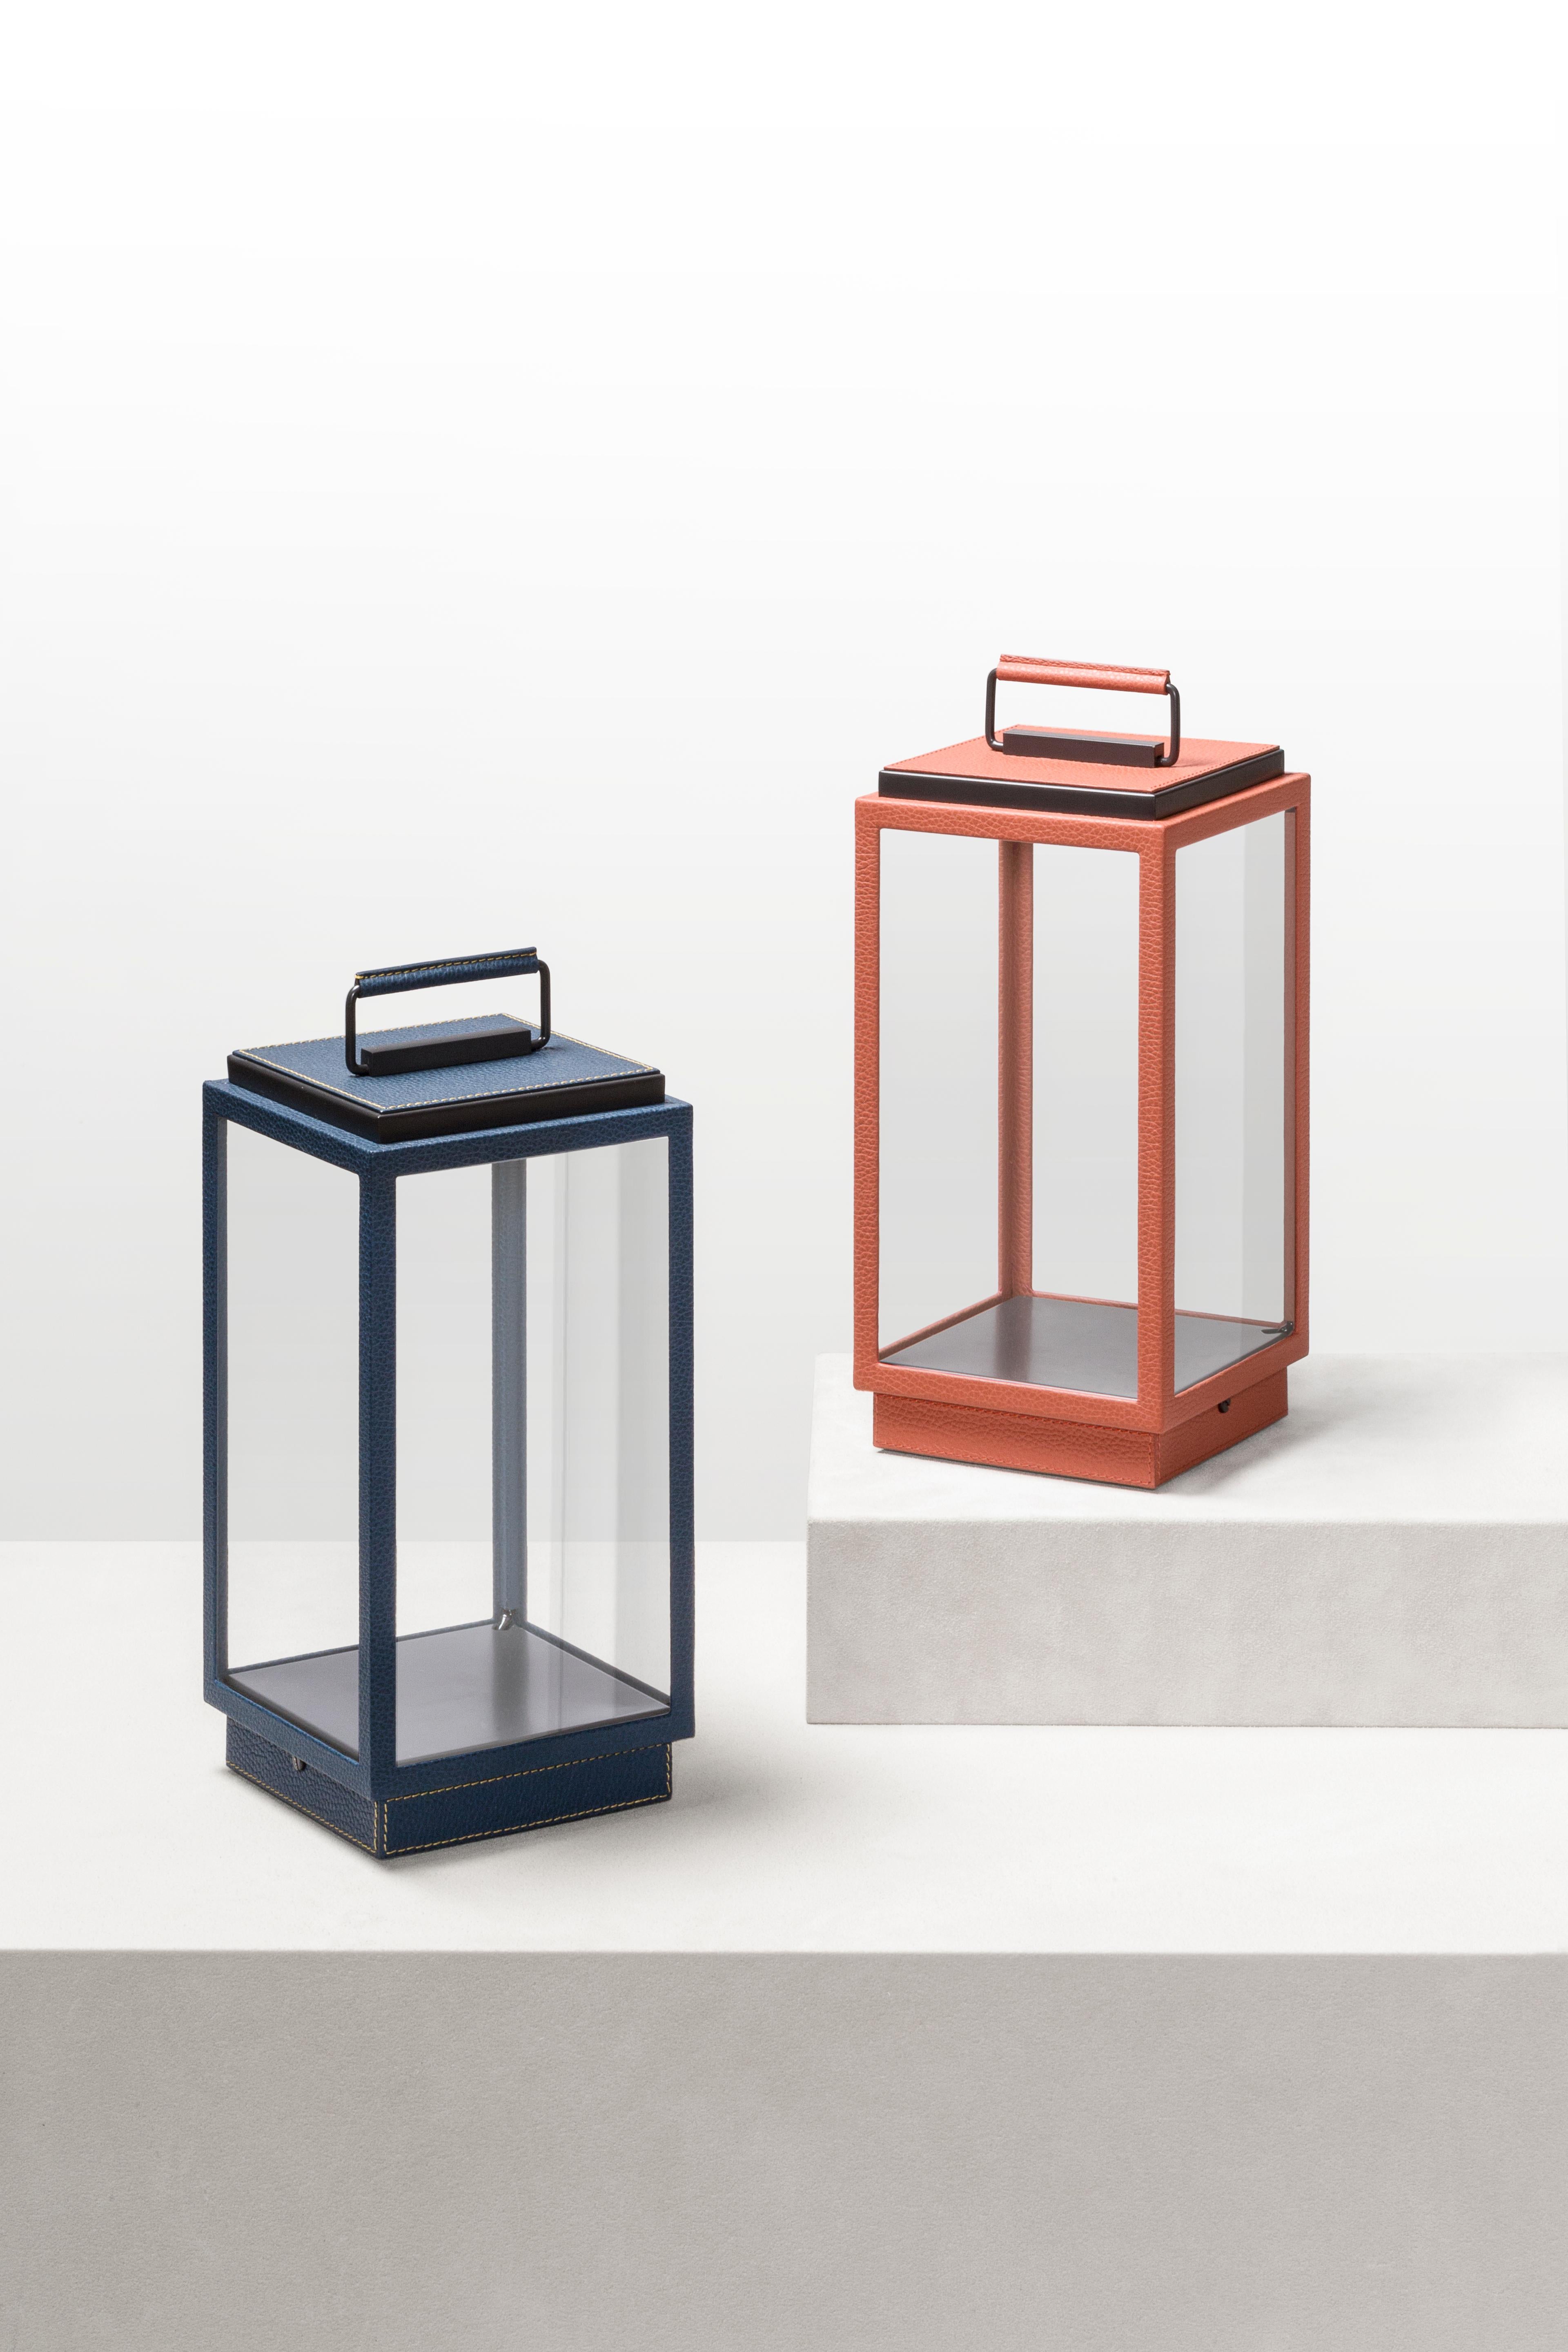 Tekna and Gio Bagnara have partnered to make these stunning table lamps that you can charge and use with or without the cord for hours.